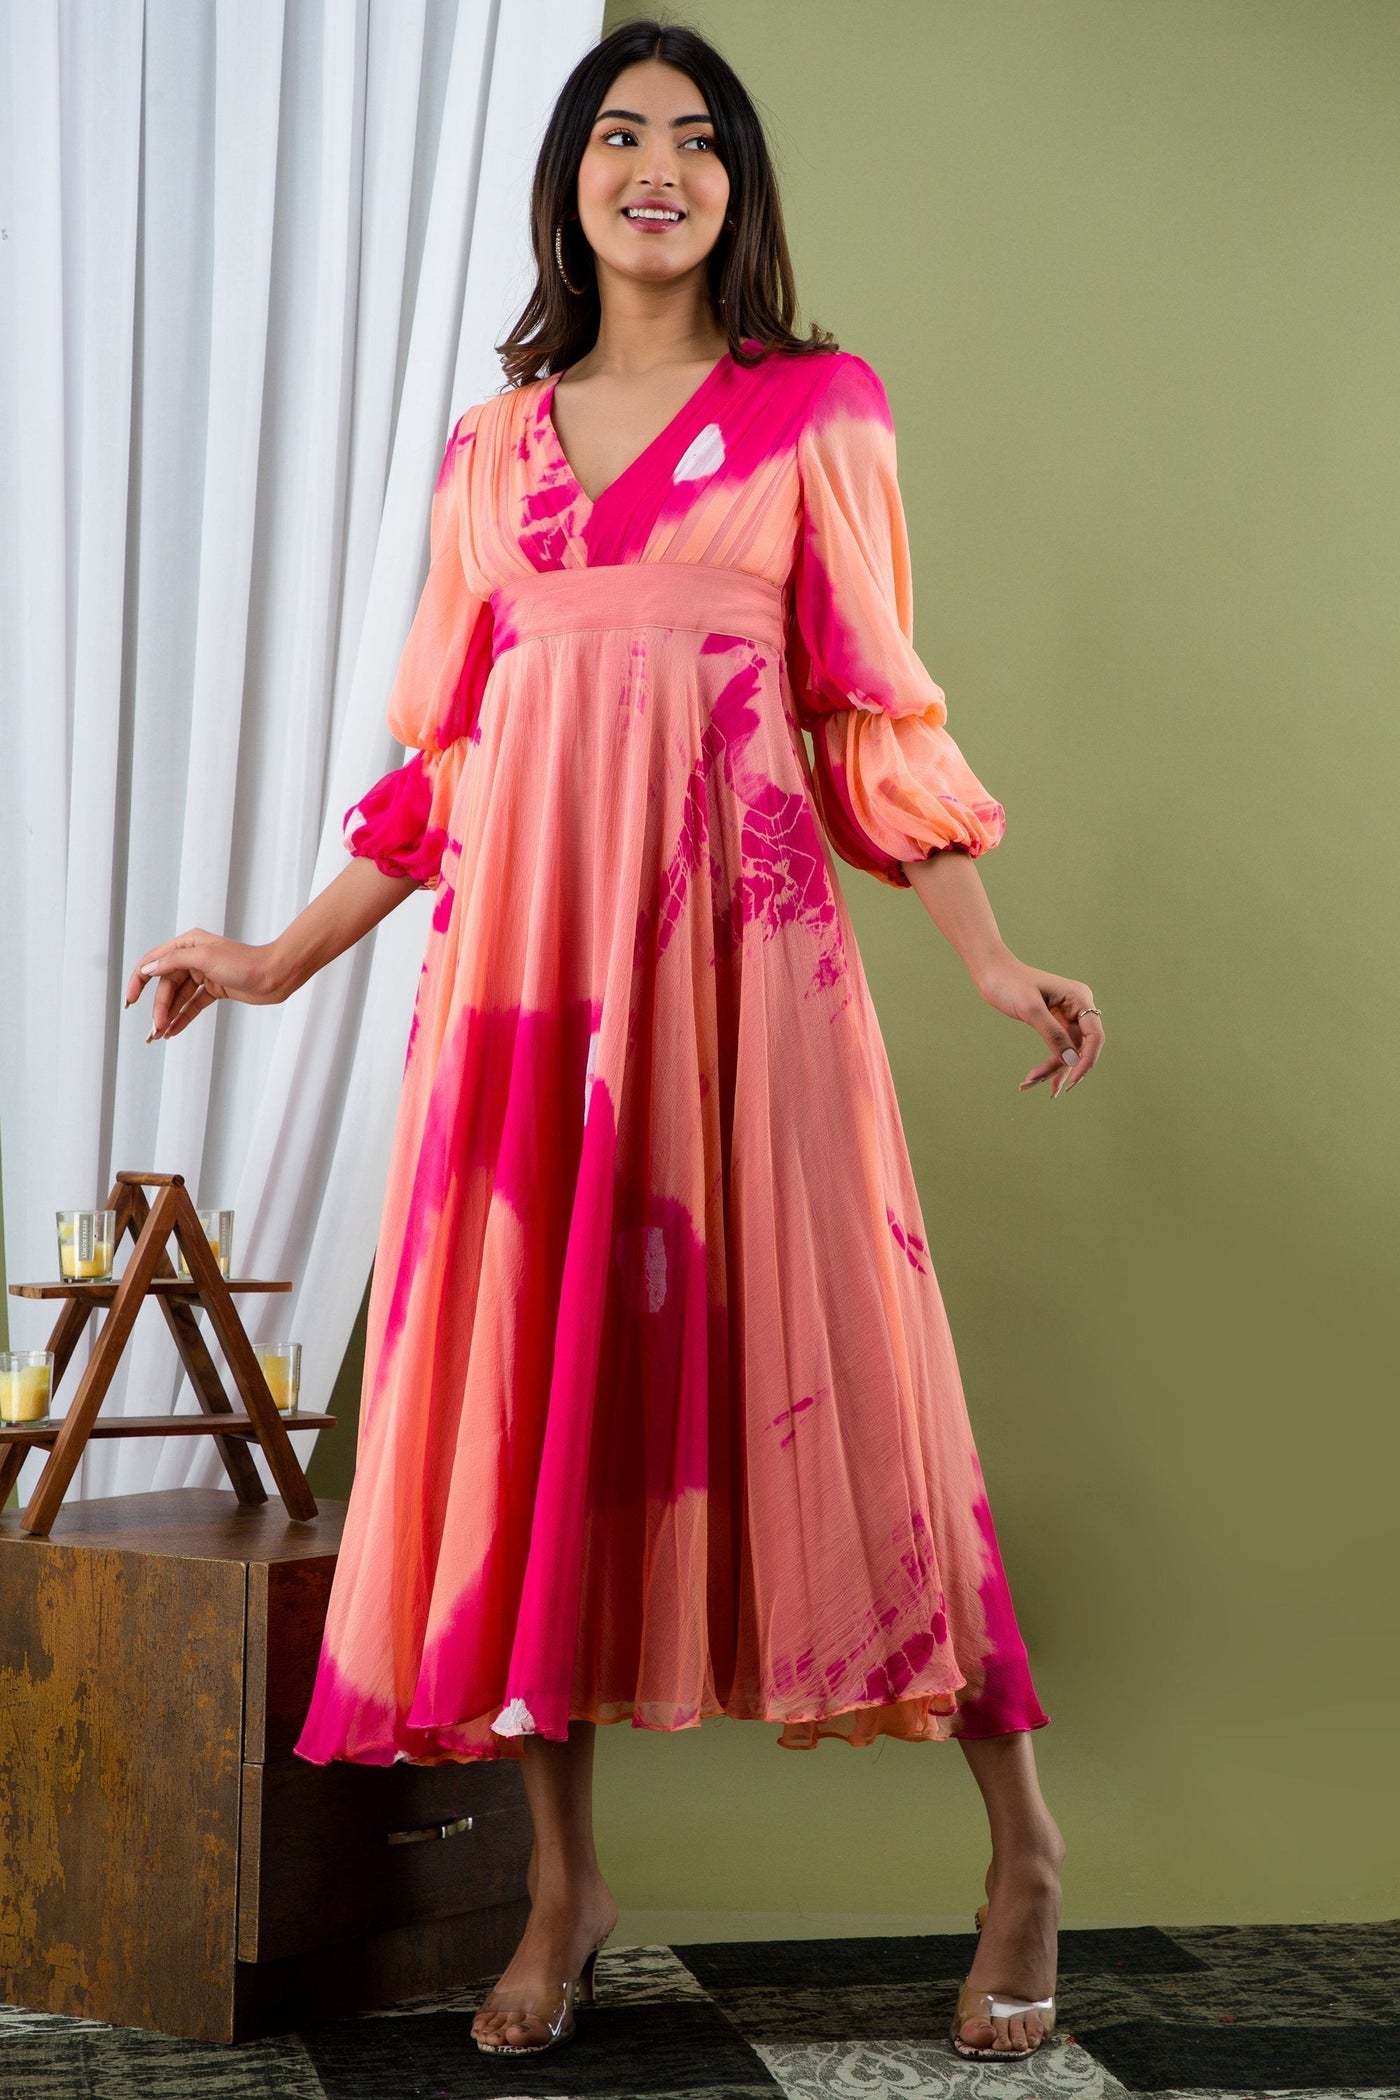 Women's Peach and Pink Tie Dye A-Line Fit and Flare Maxi Dress by SARAS THE LABEL (1 Pc Set)